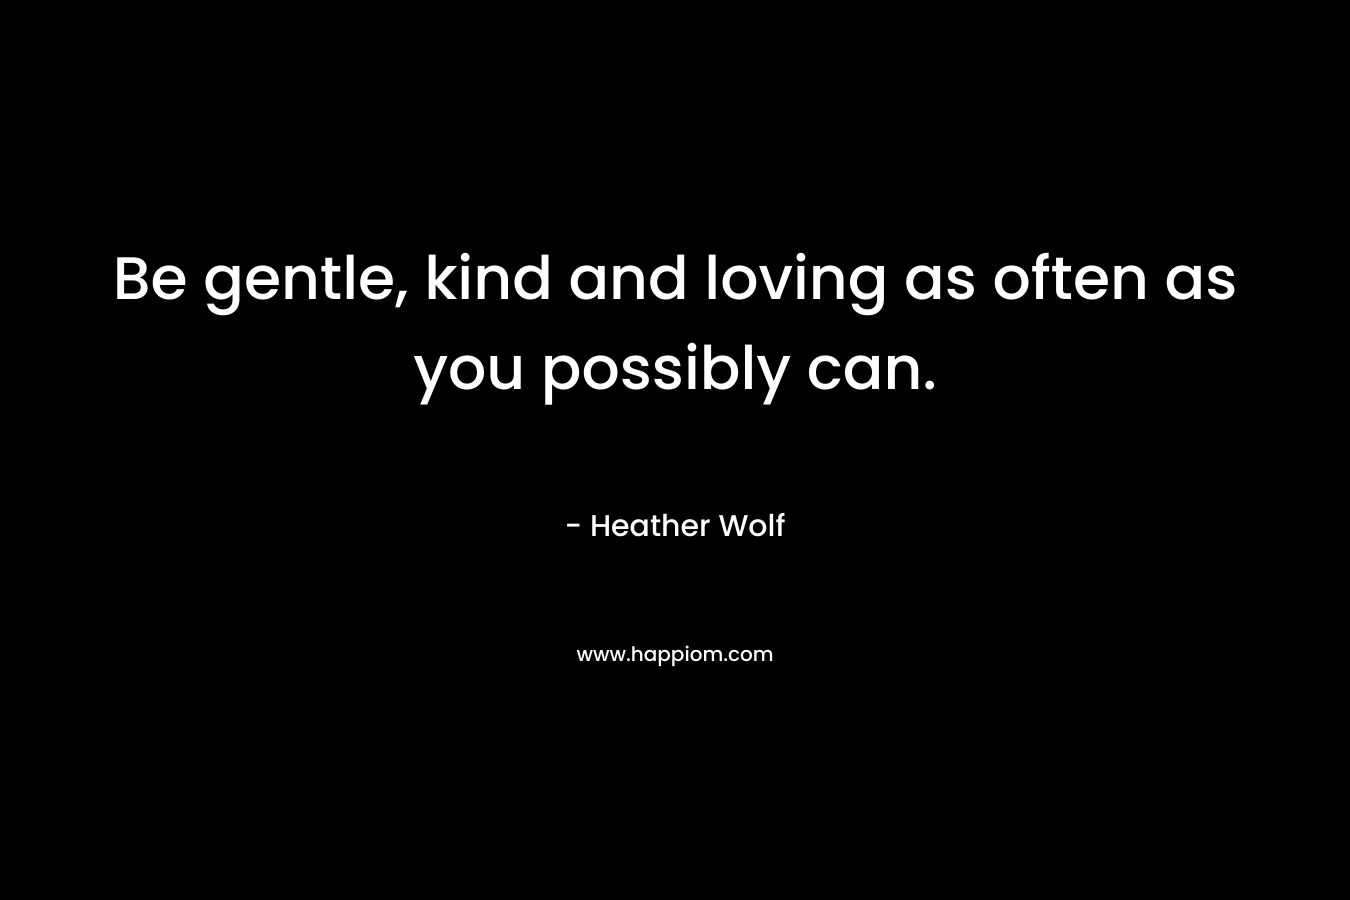 Be gentle, kind and loving as often as you possibly can. – Heather Wolf